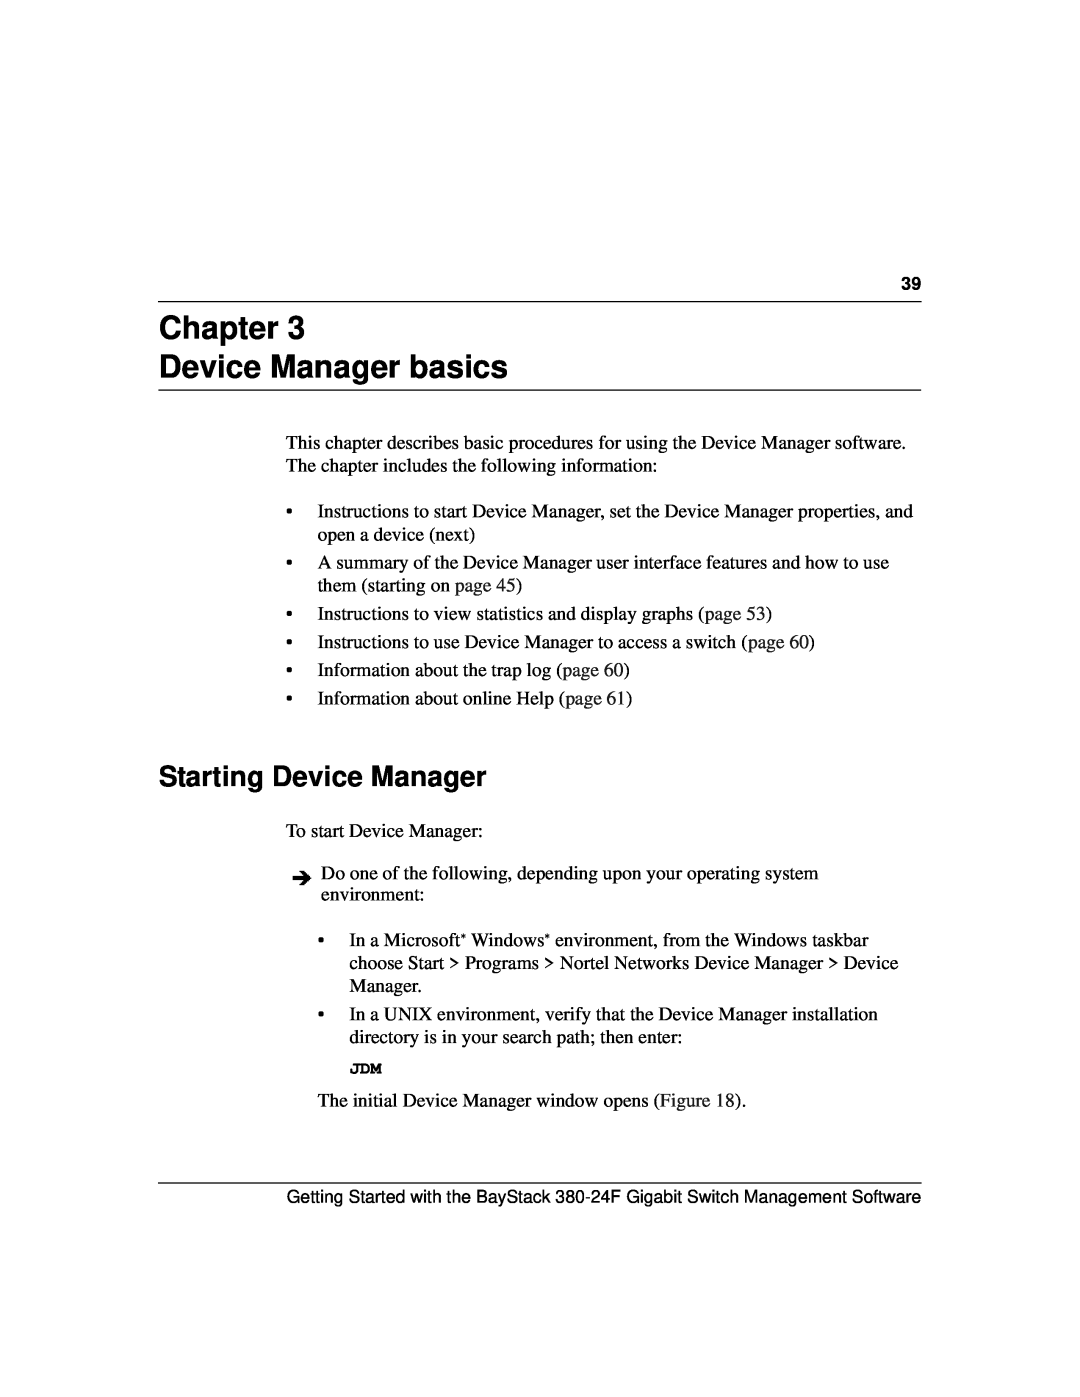 Nortel Networks 380-24F manual Chapter Device Manager basics, Starting Device Manager 